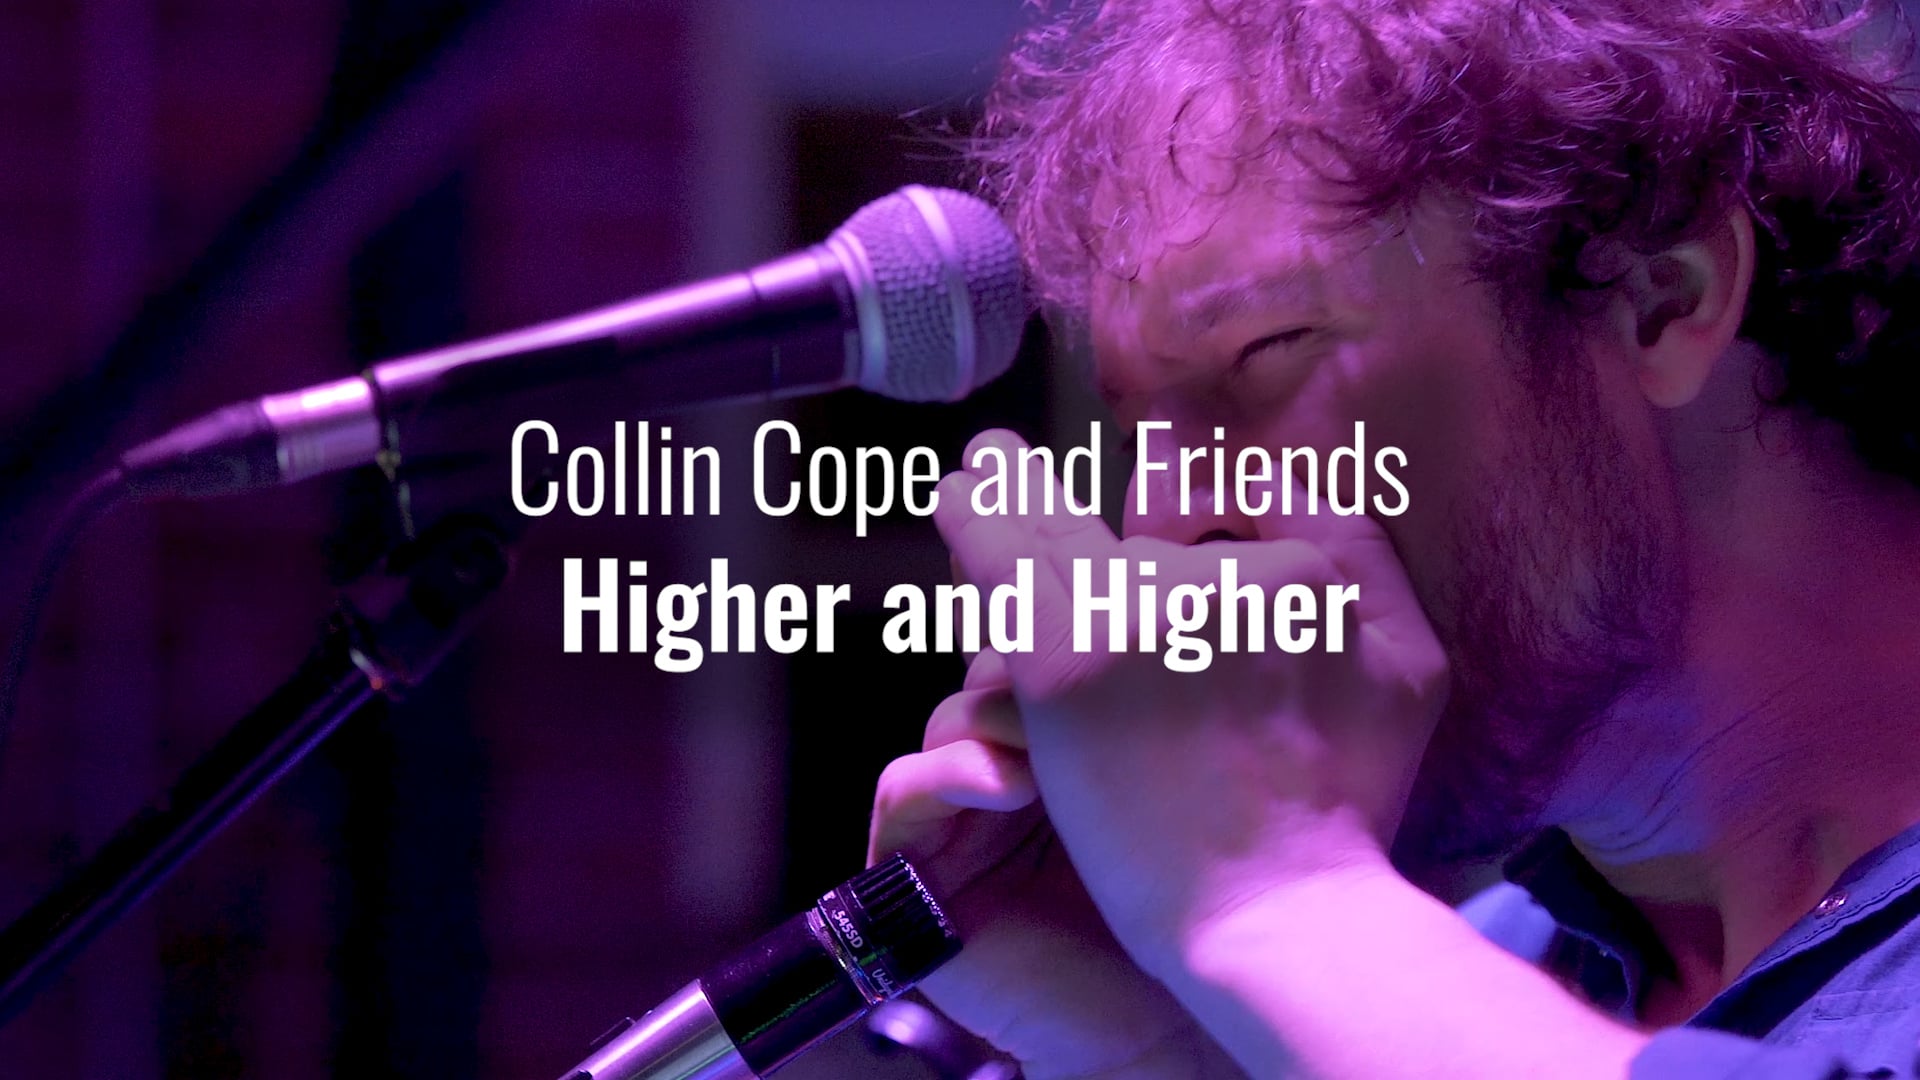 Higher and Higher - Collin Cope & Friends (Live at Foam Brewers) 2019